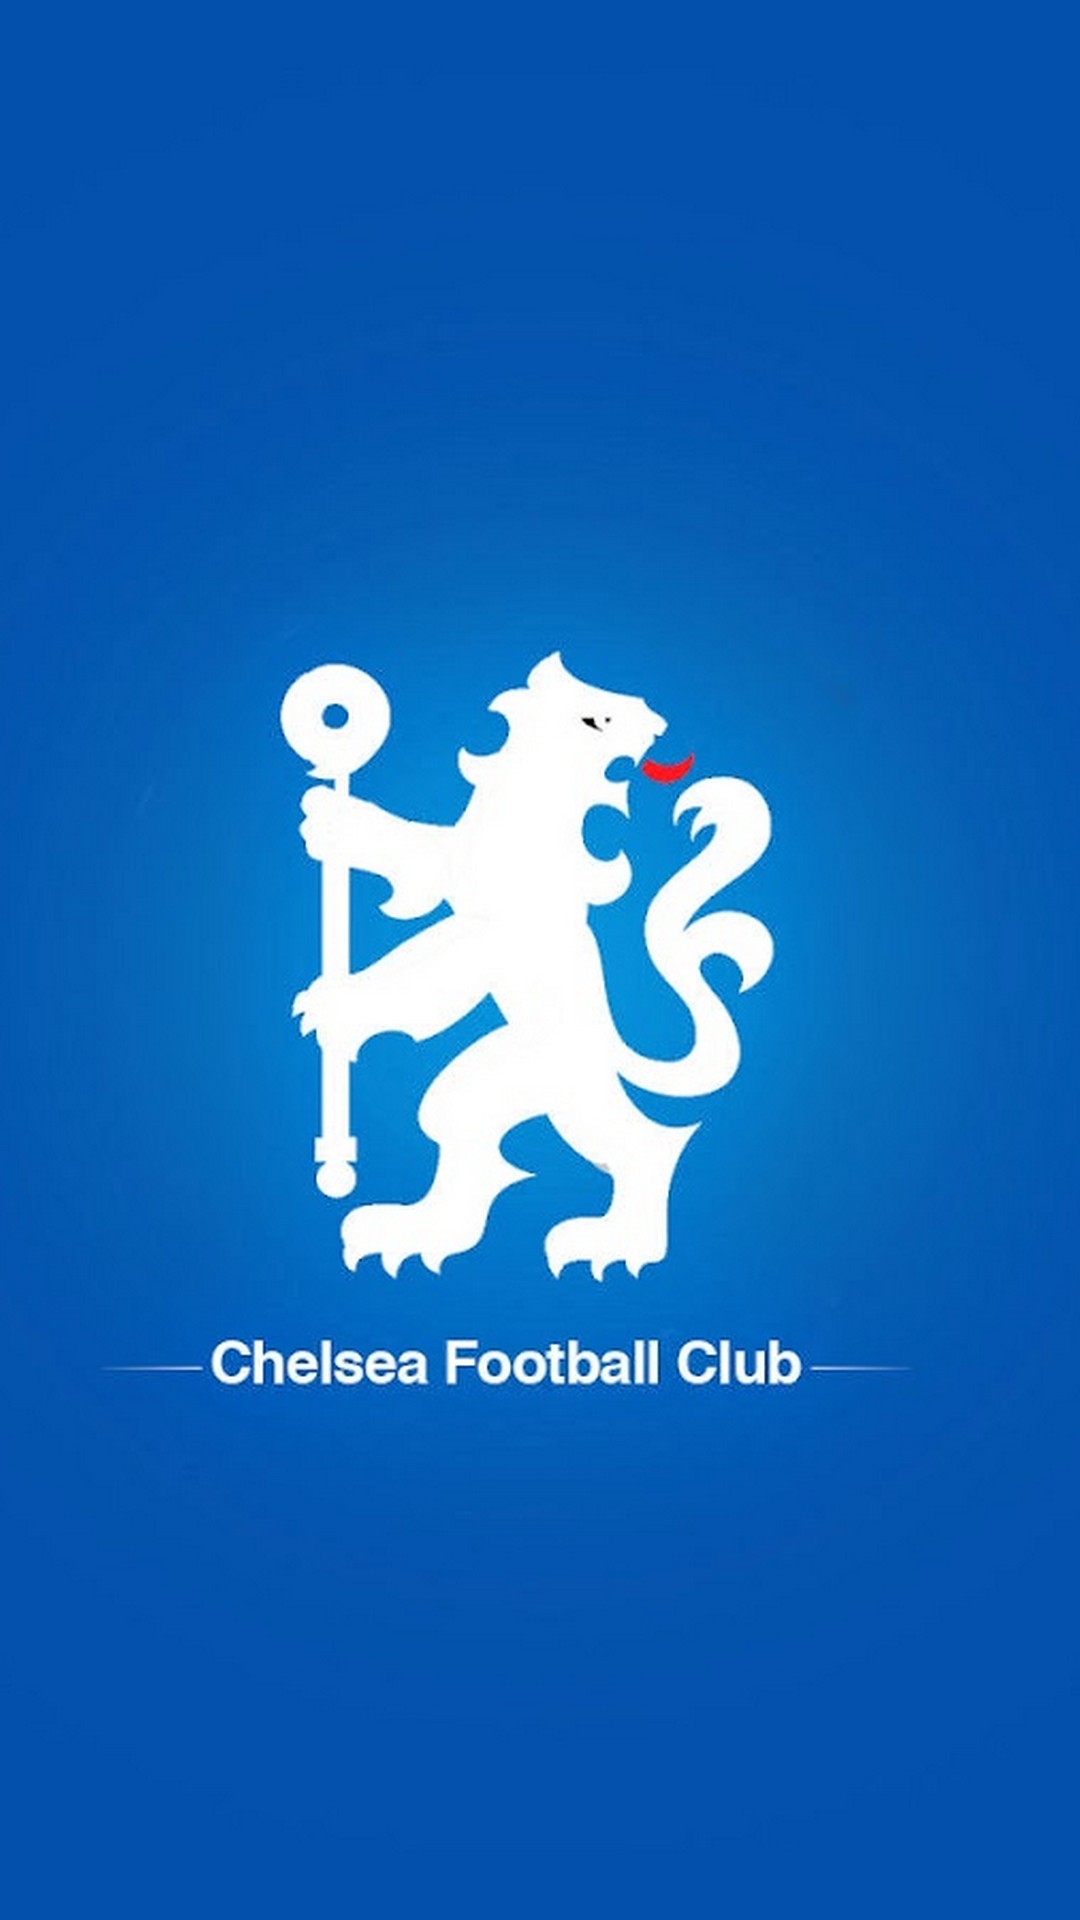 Chelsea Football Club HD Wallpaper For iPhone With Resolution 1080X1920 pixel. You can make this wallpaper for your Mac or Windows Desktop Background, iPhone, Android or Tablet and another Smartphone device for free